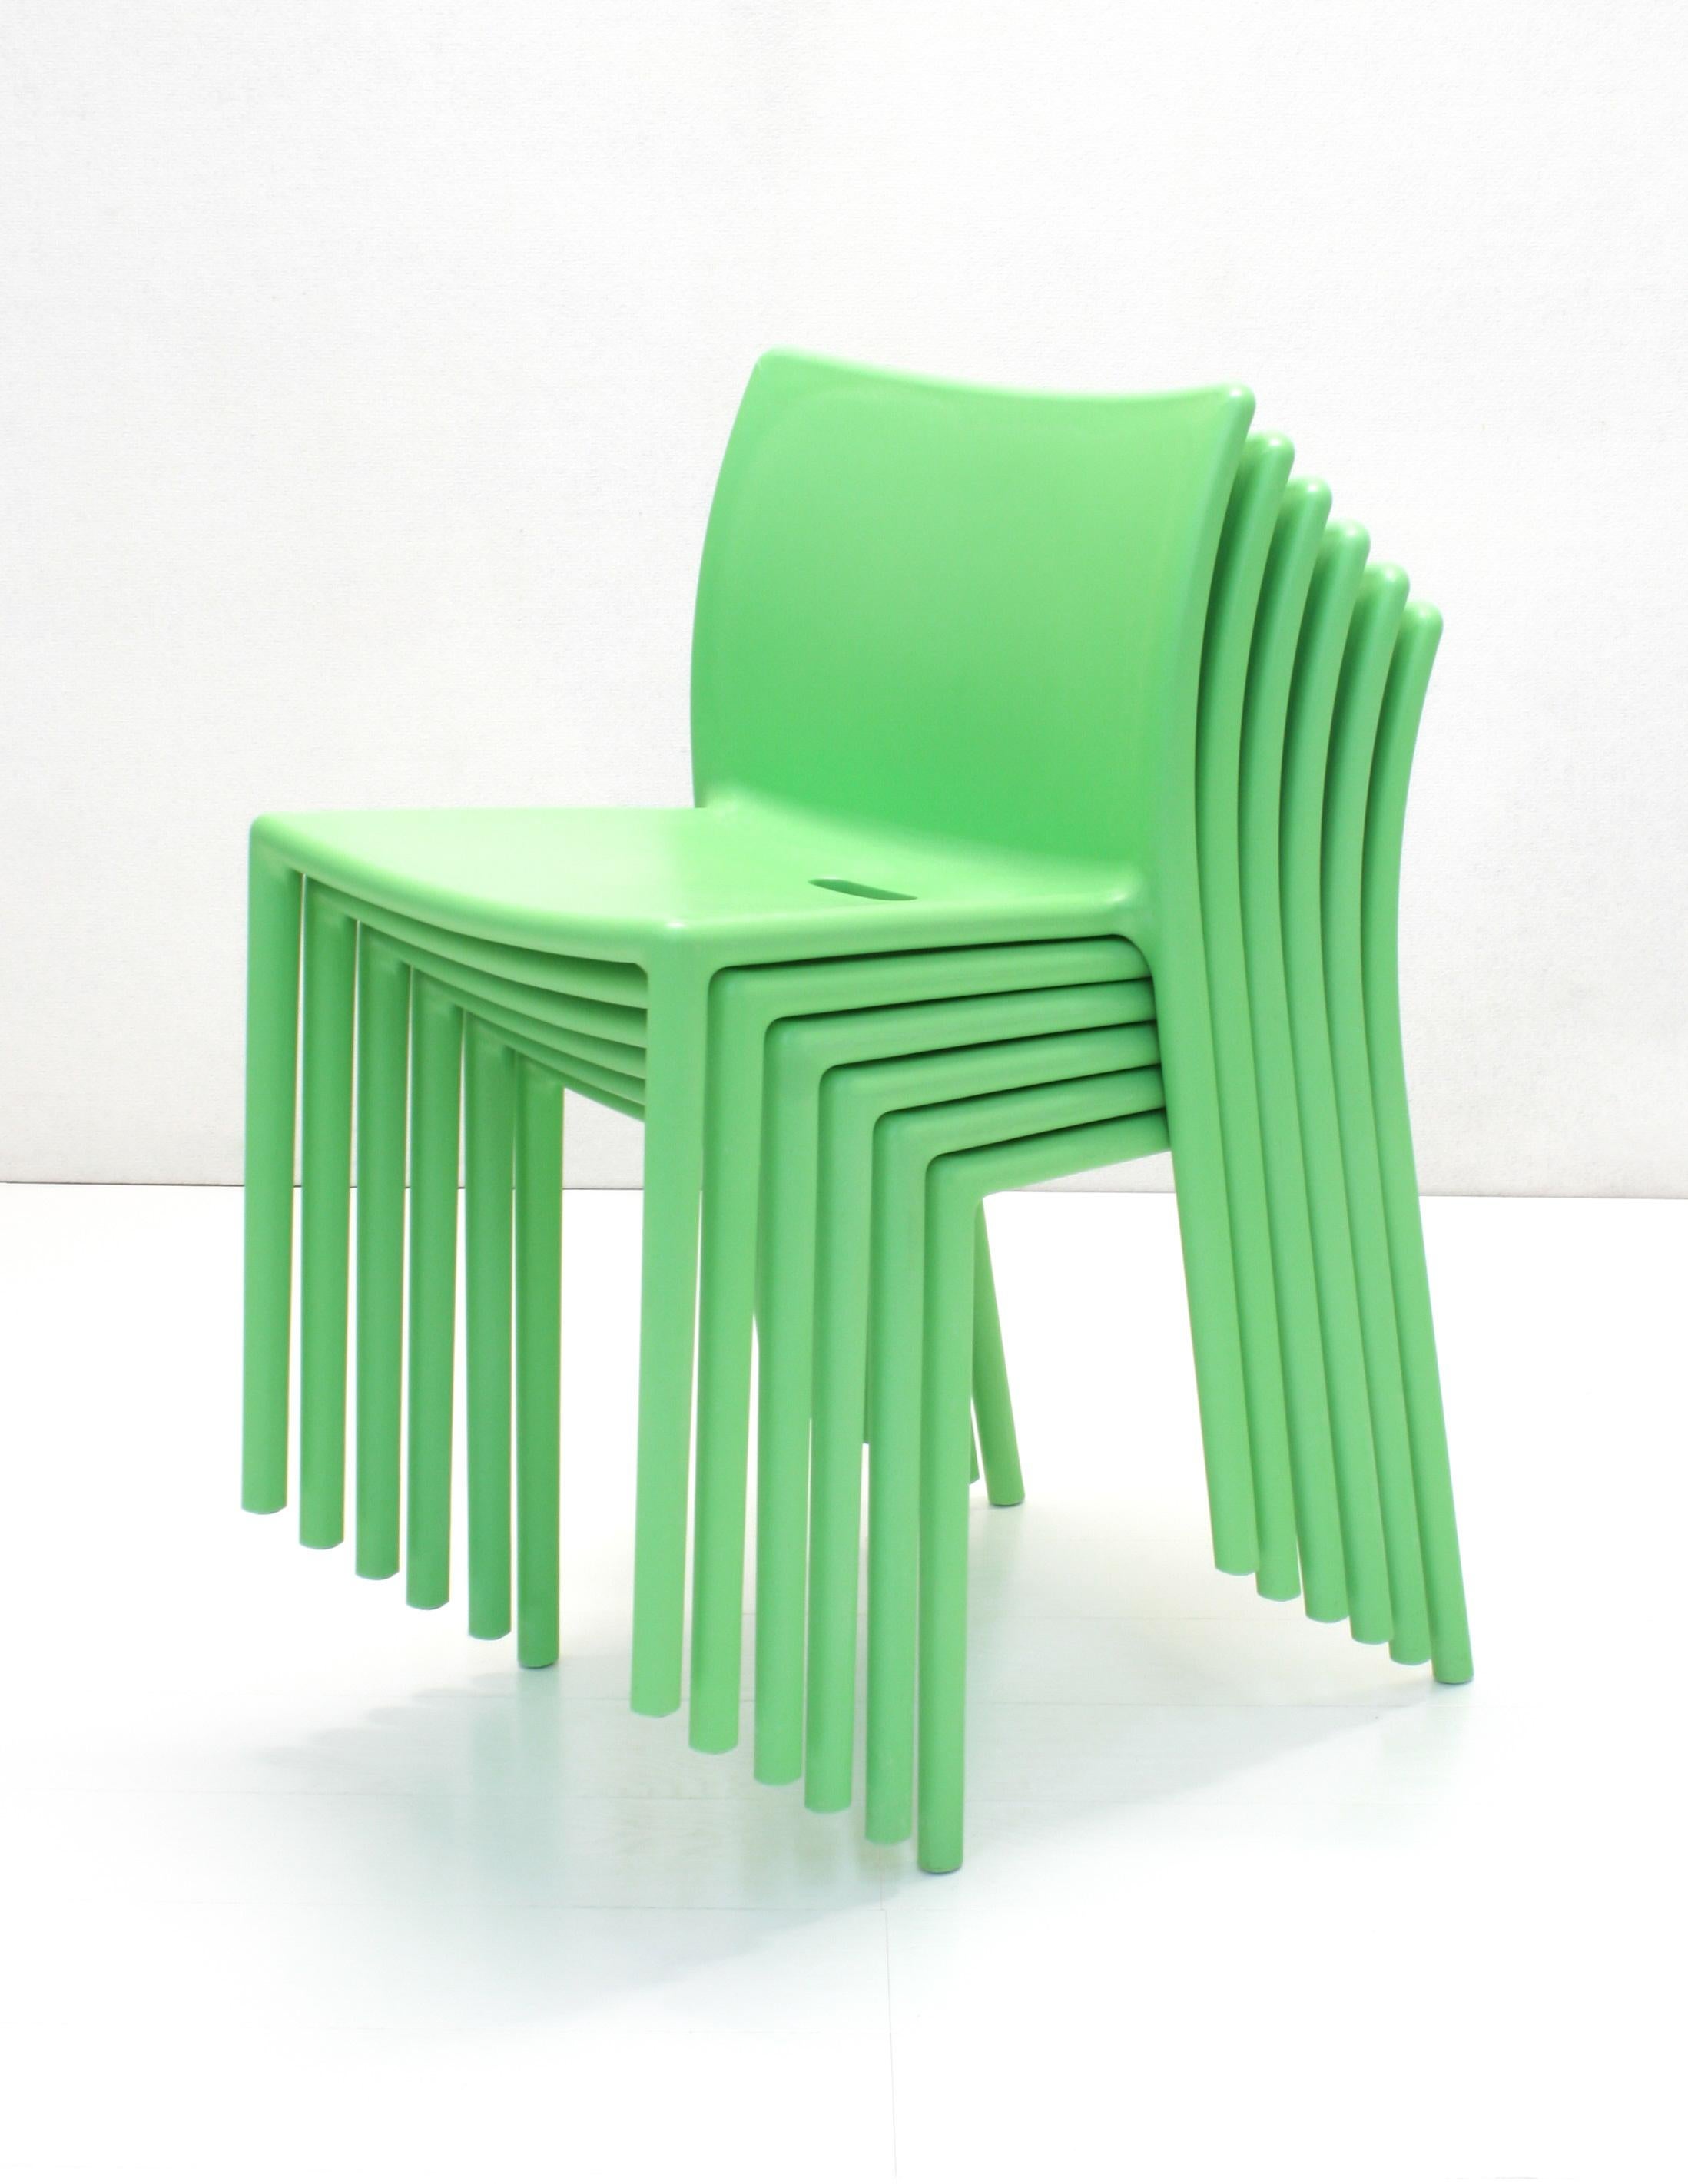 Minimalist Set of 6 Air Chairs by Jasper Morrison for Magis, 1999 For Sale